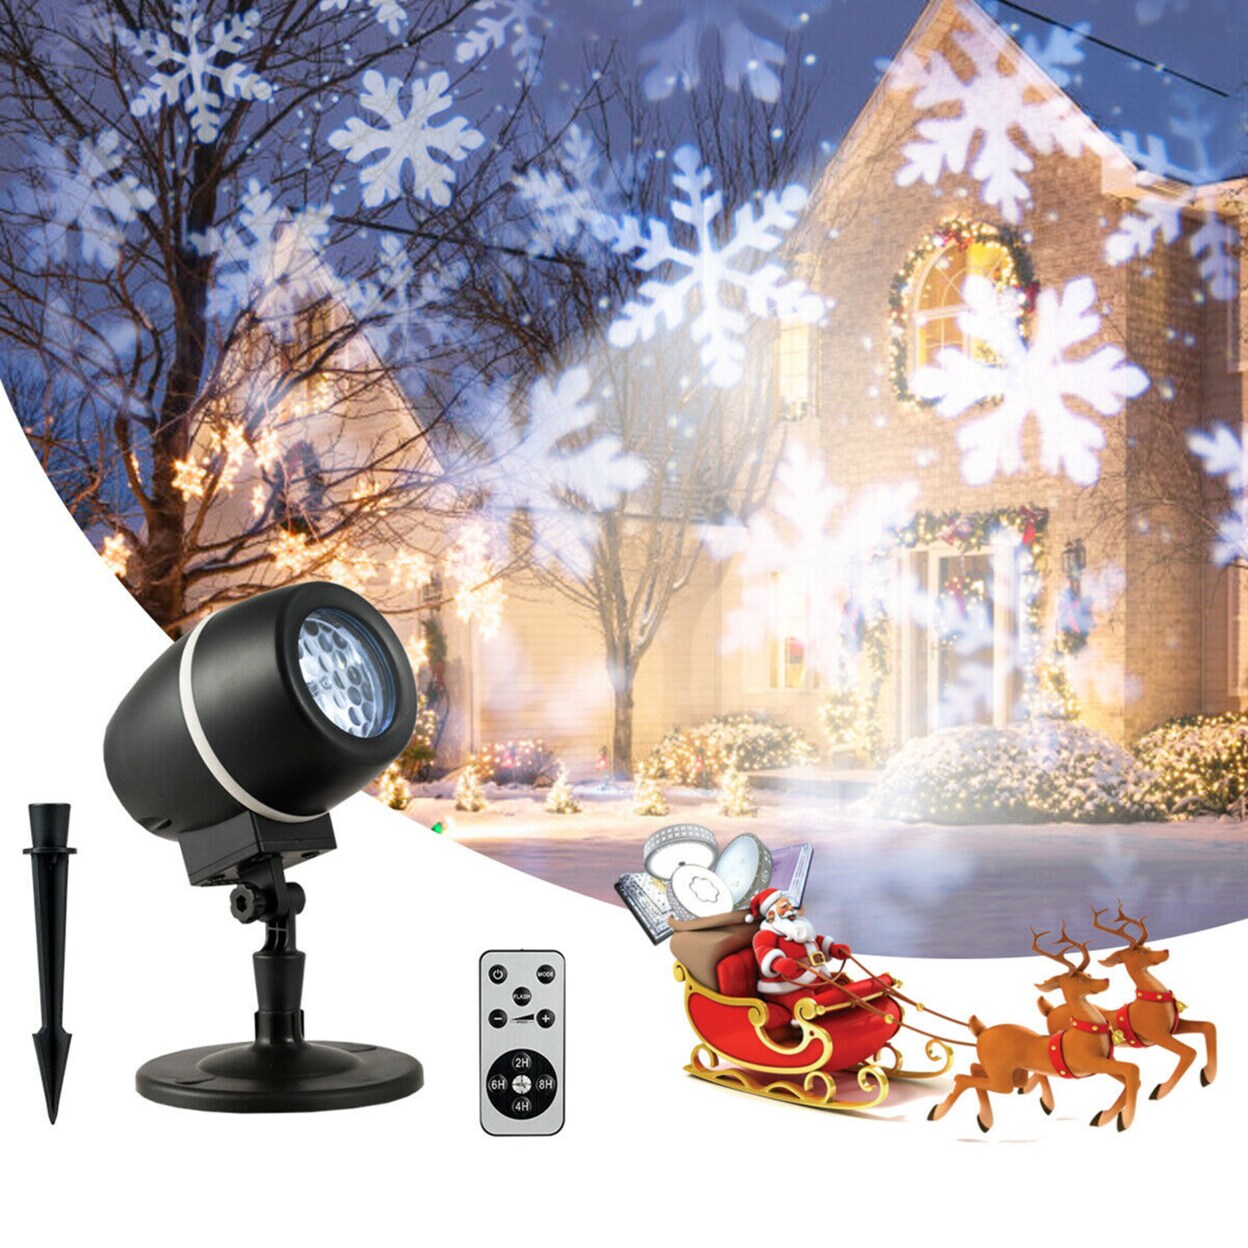 Gymax Christmas Snowflake LED Projector Lights Outdoor Waterproof w/ Remote Control